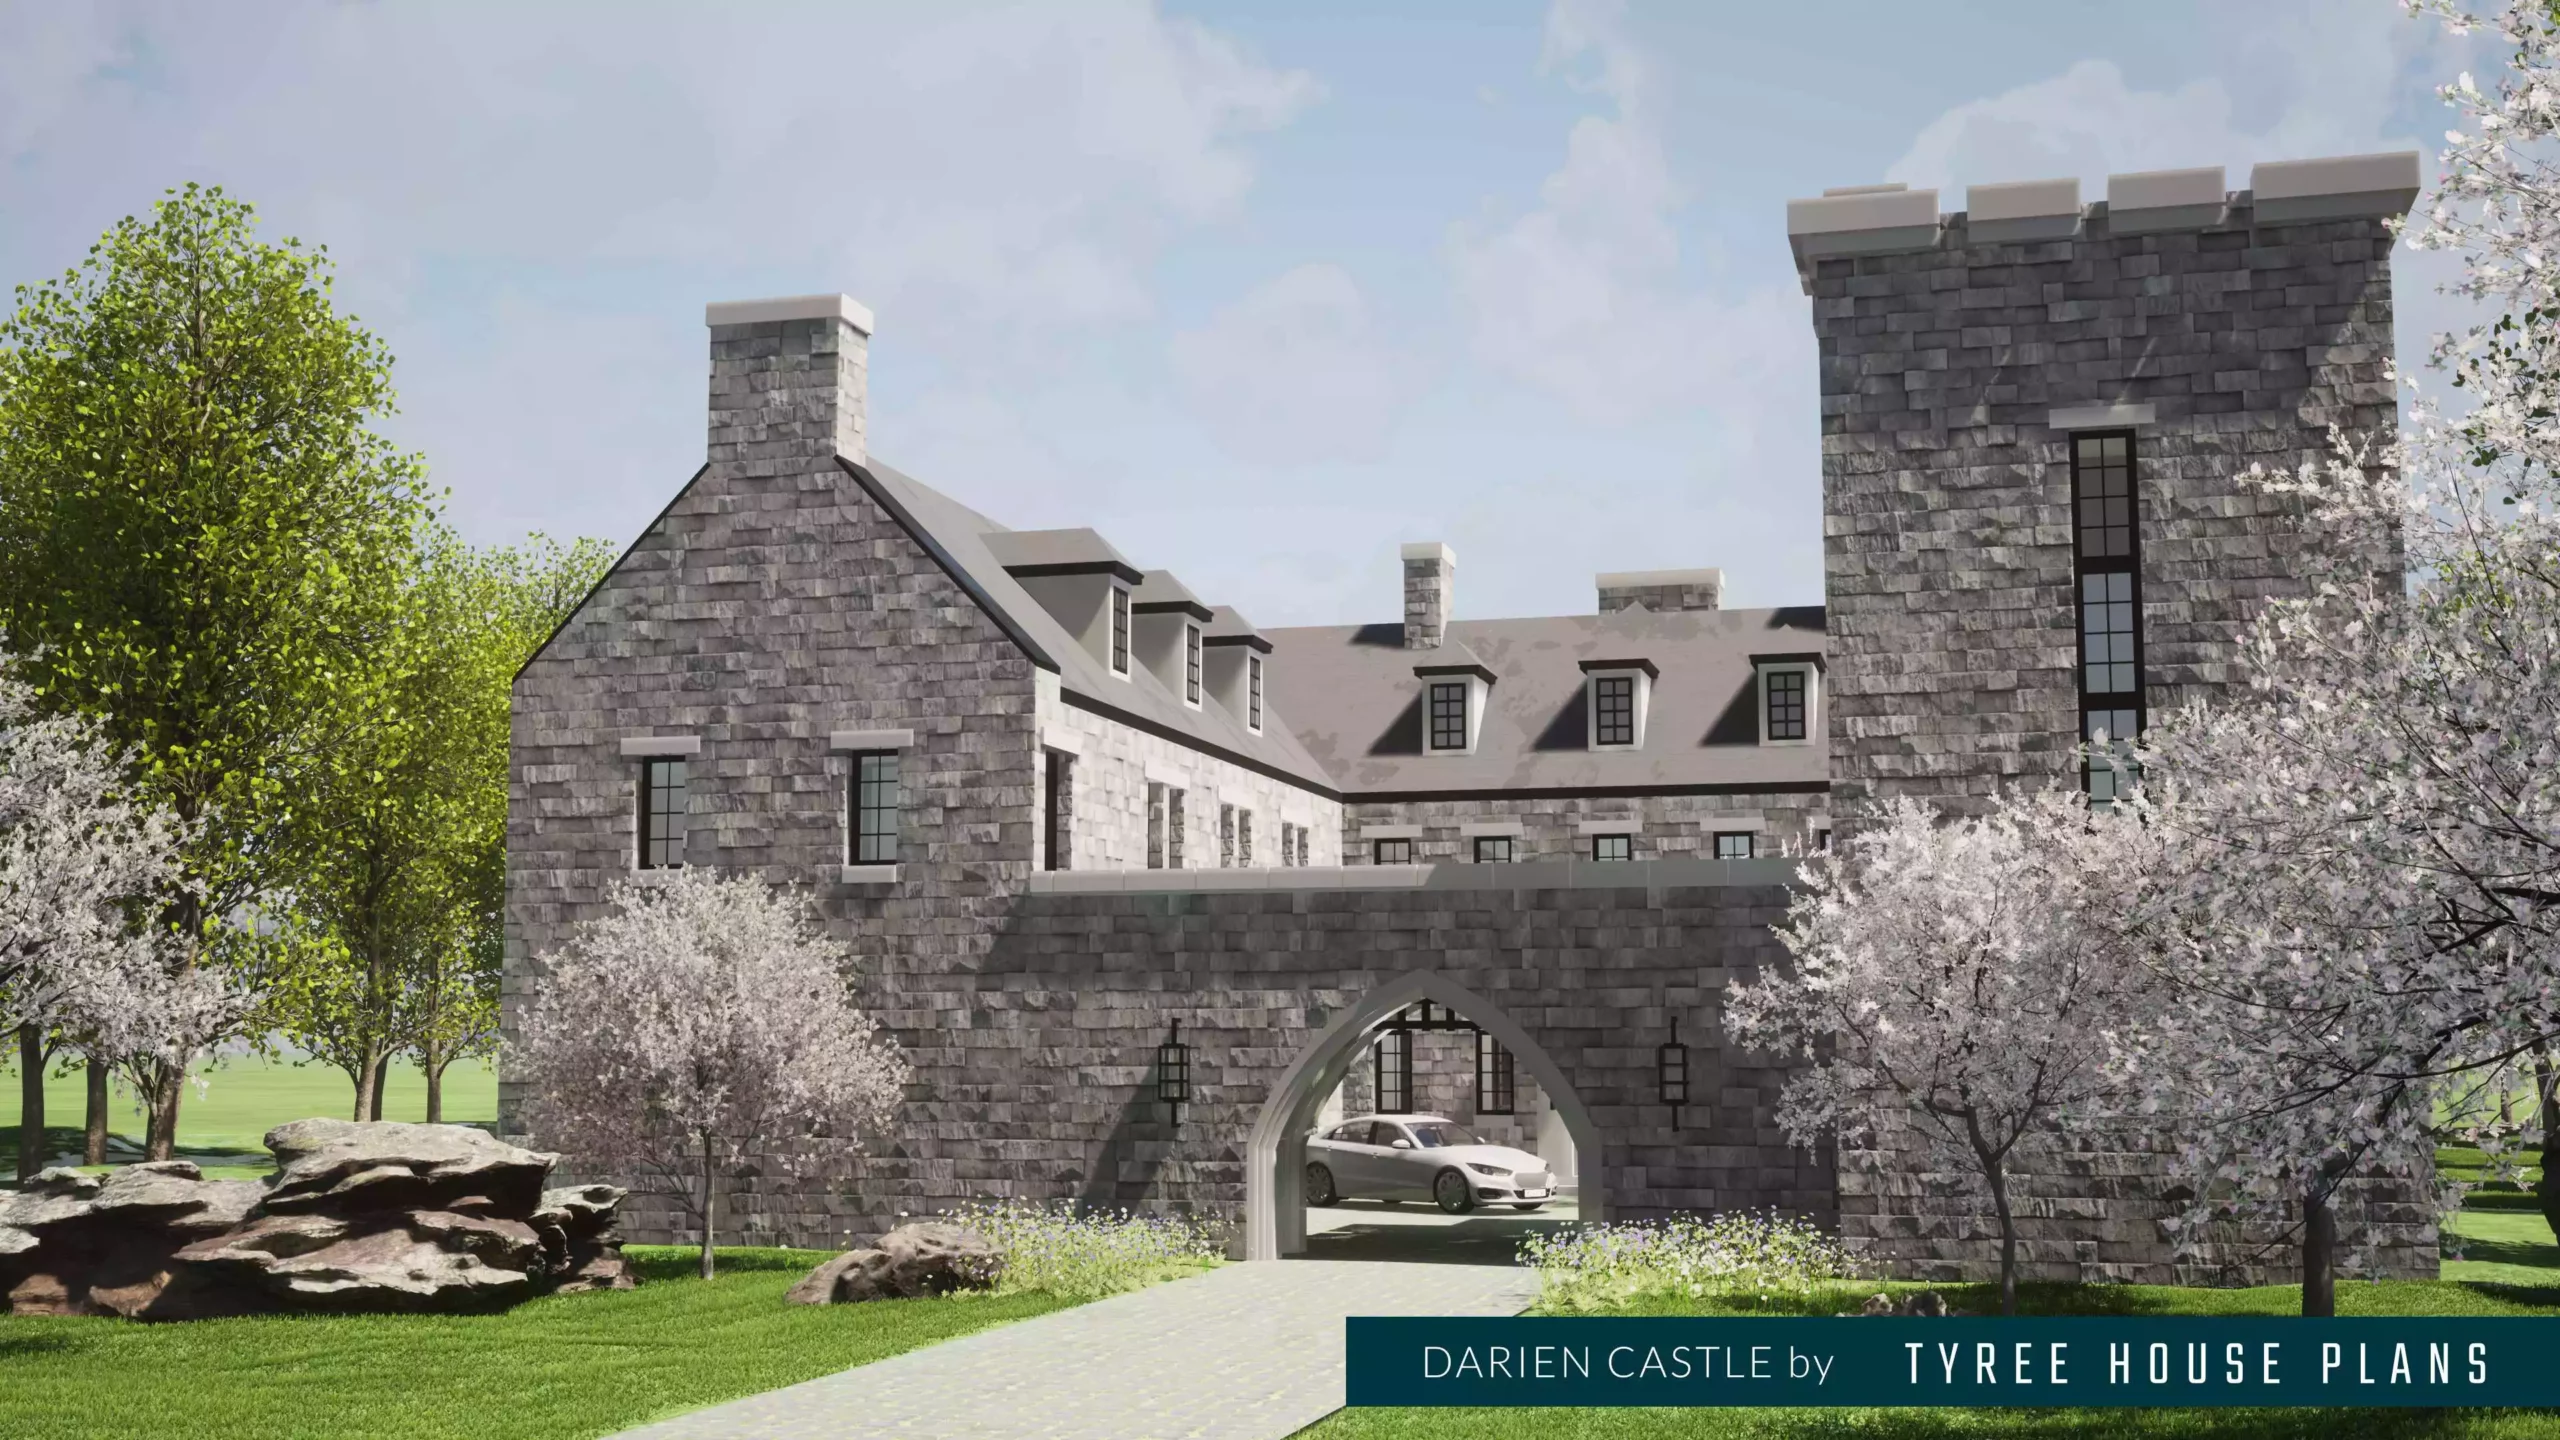 Front view. Darien Castle by Tyree House Plans.